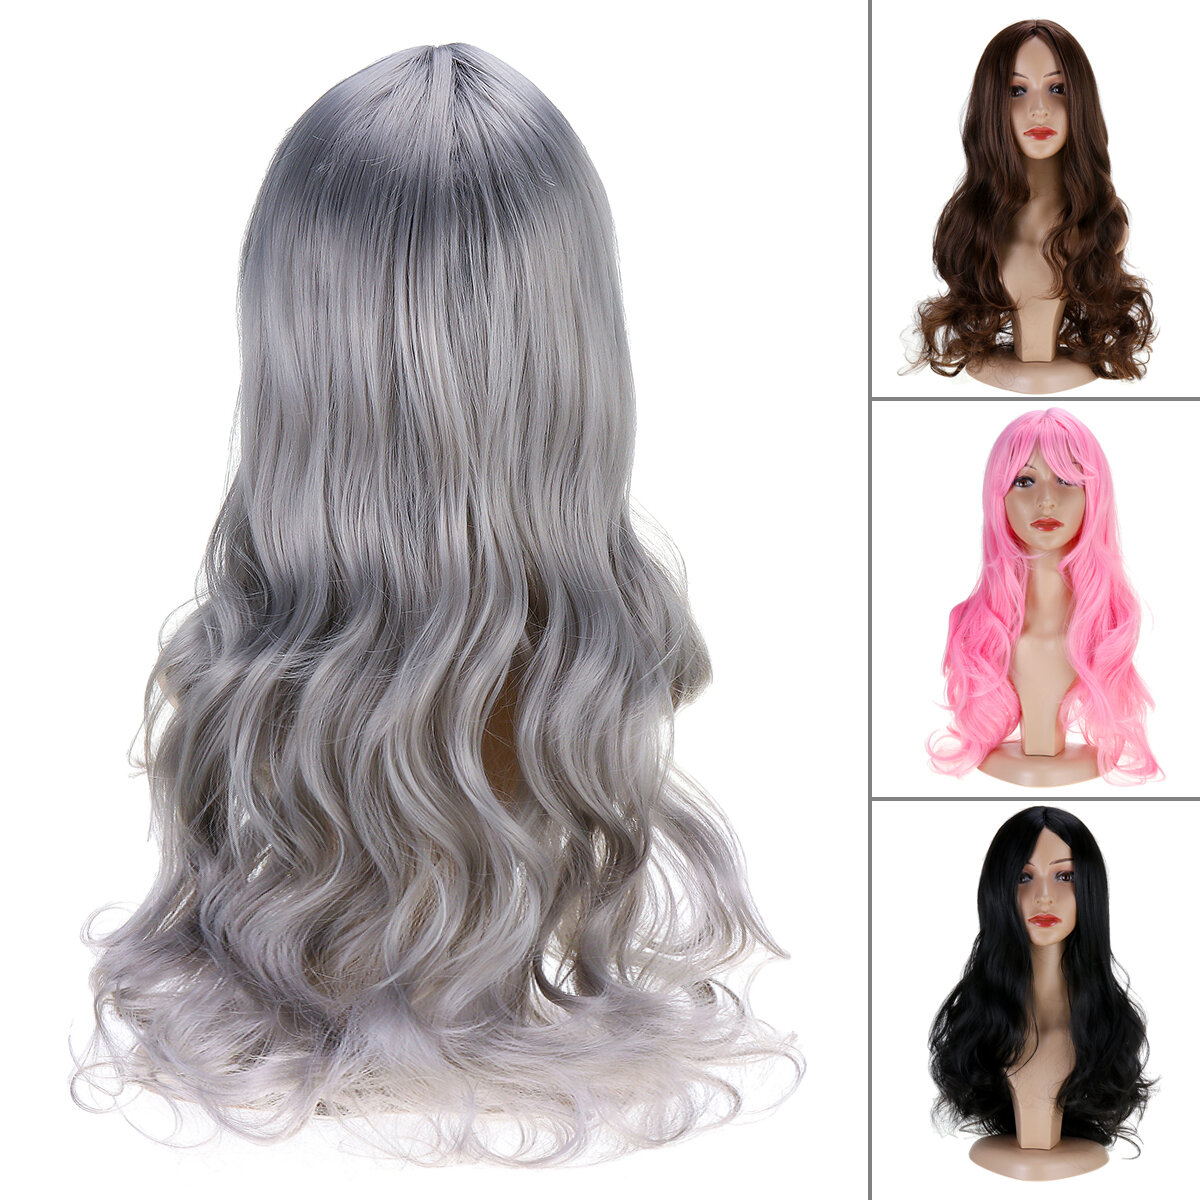 Women Wig Full Wavy Hair Extensions Heat Resistant Synthetic Grey